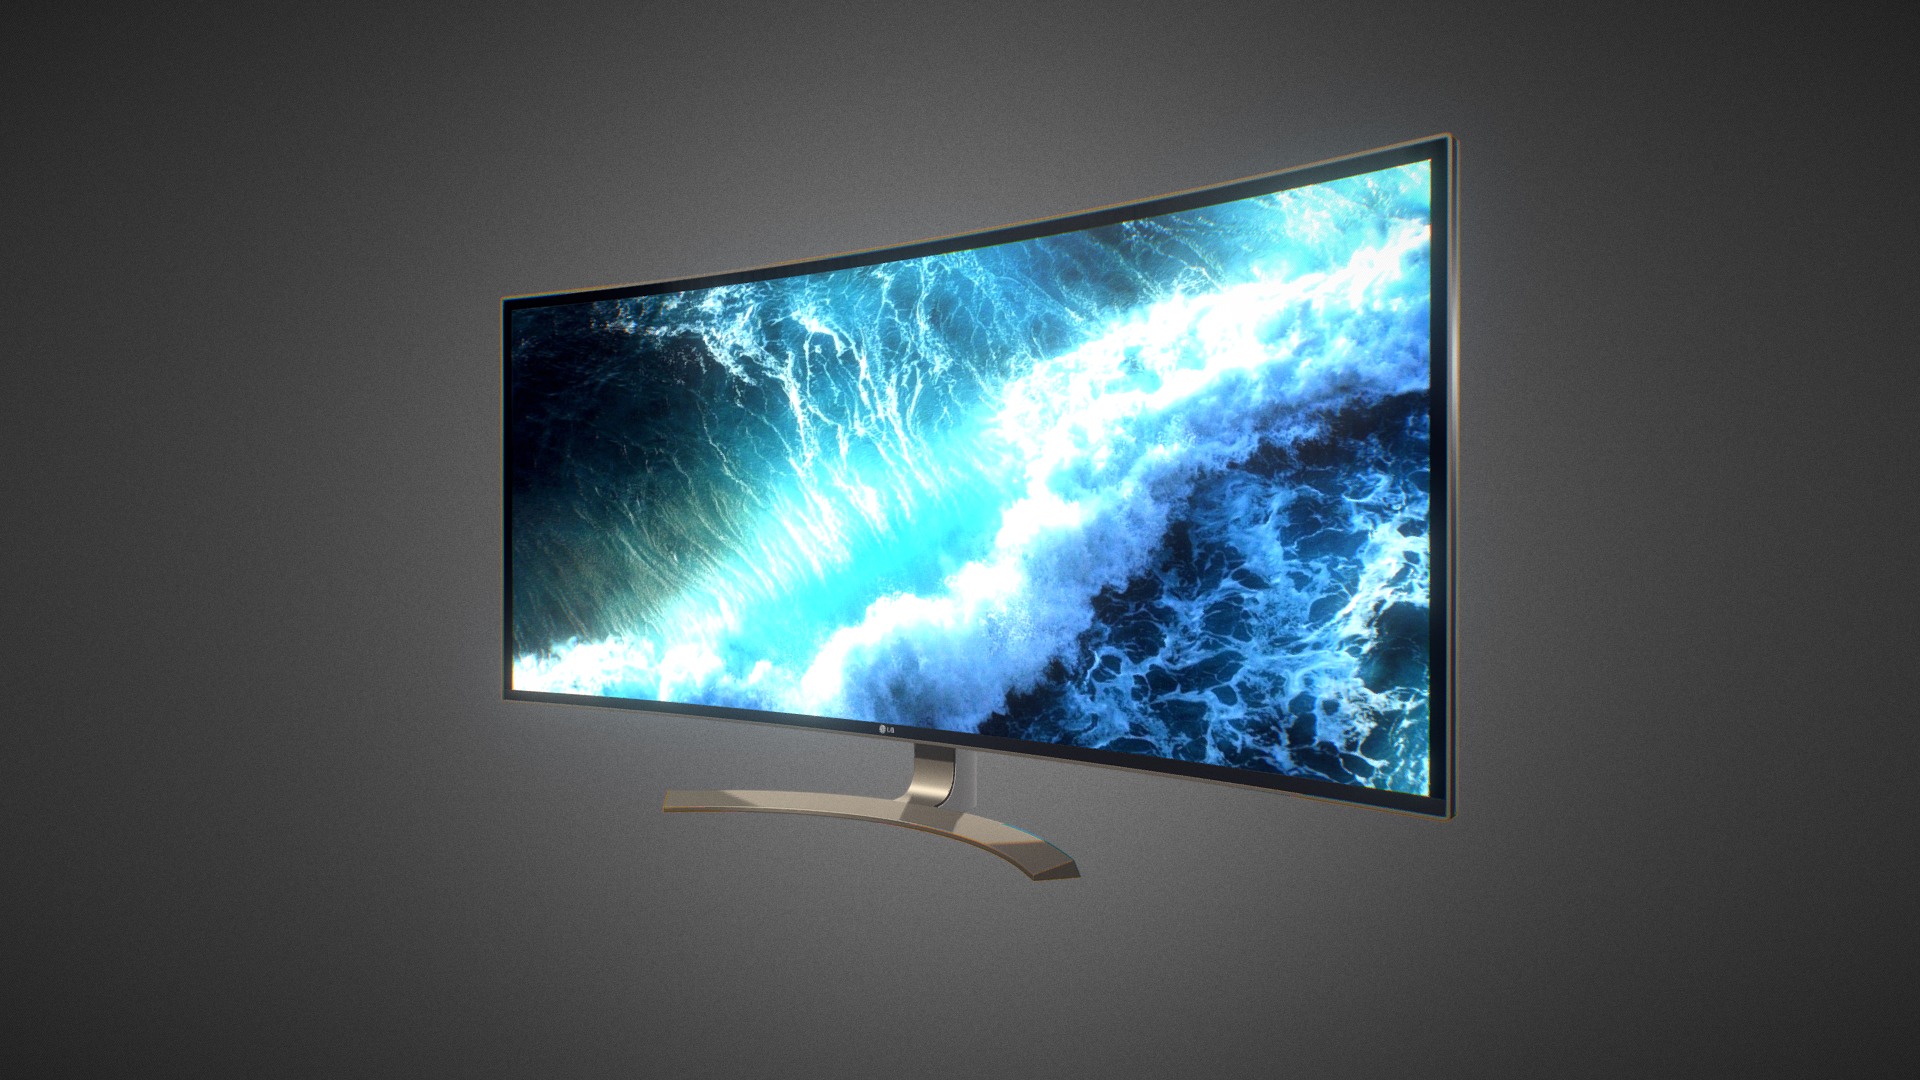 3D model LG 38UC99-W  for Element 3D - This is a 3D model of the LG 38UC99-W  for Element 3D. The 3D model is about a television screen with a blue background.